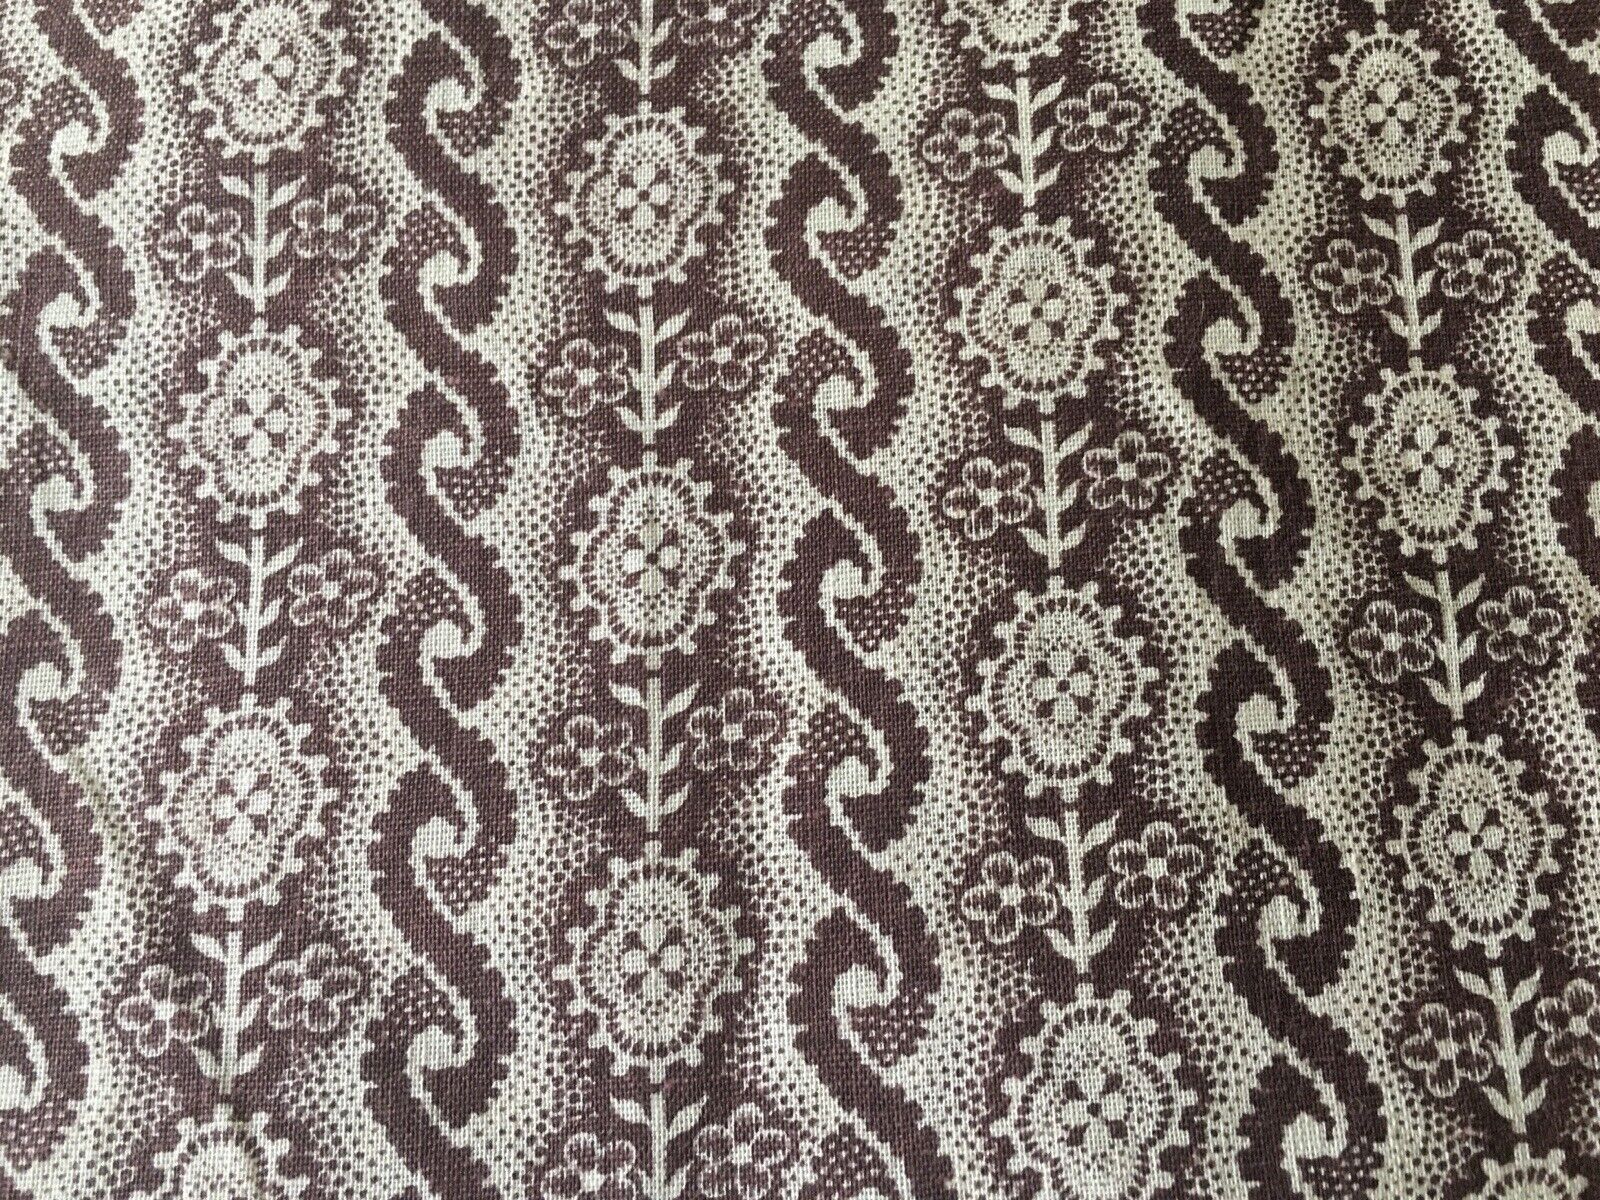 Beautiful Antique 19th Century Floral Picotage Dot Calico Cotton Fabric ~ Brown